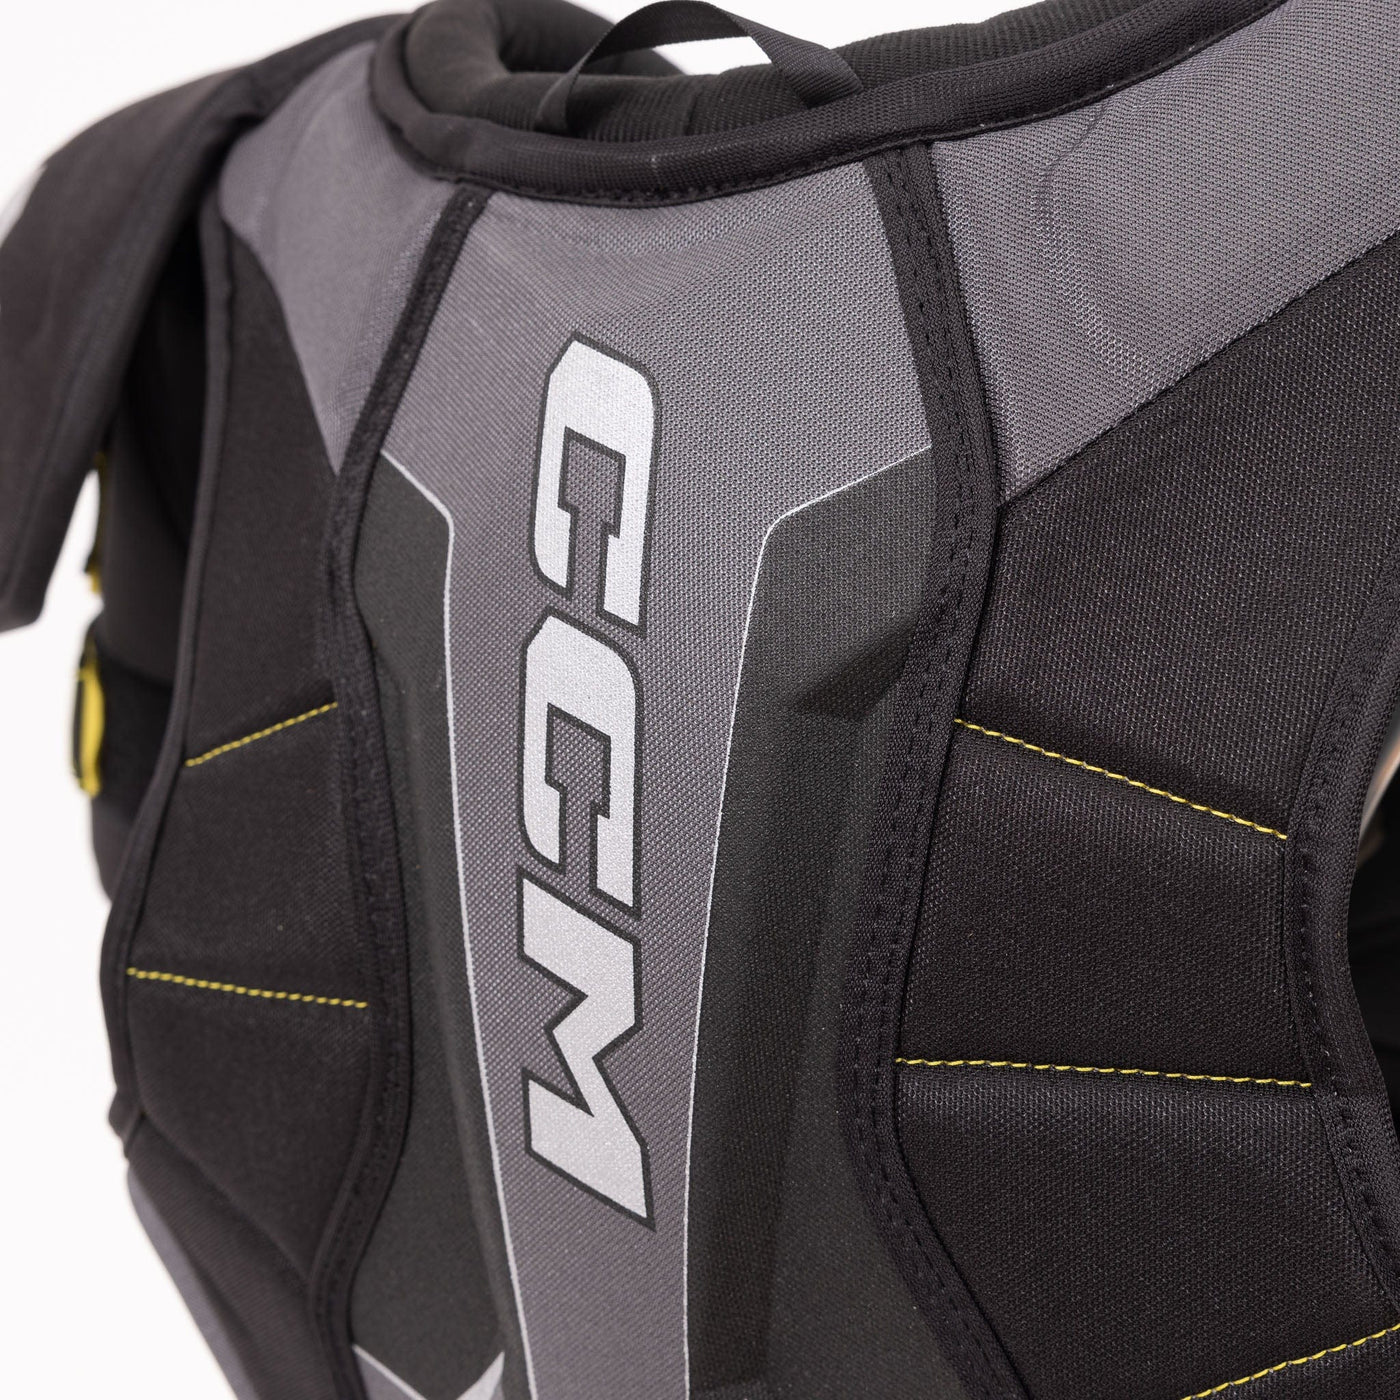 CCM Tacks Vector Plus Junior Hockey Shoulder Pads - The Hockey Shop Source For Sports